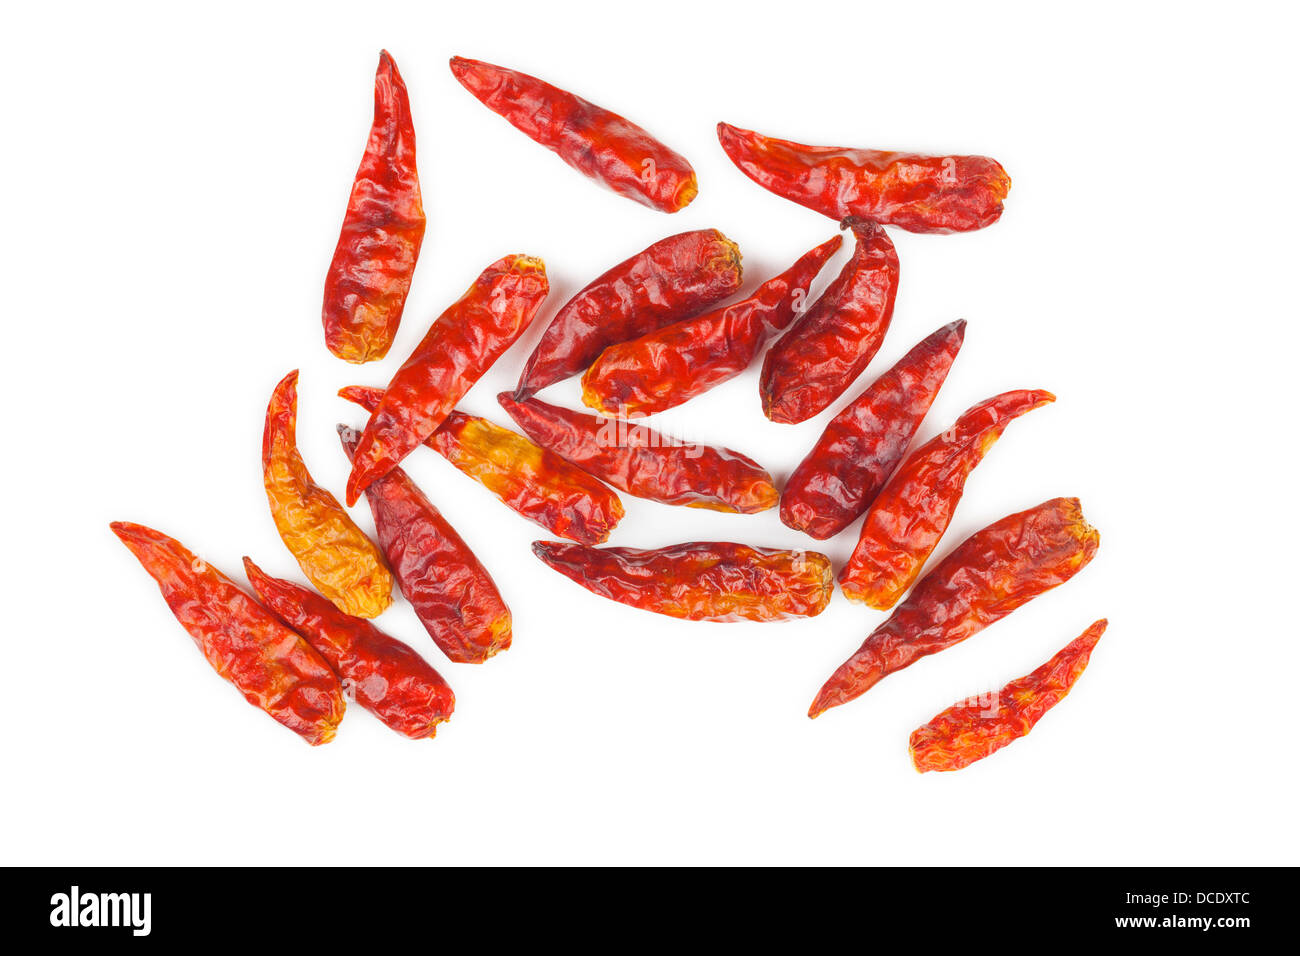 Dried red chili peppers from Vietnam Stock Photo